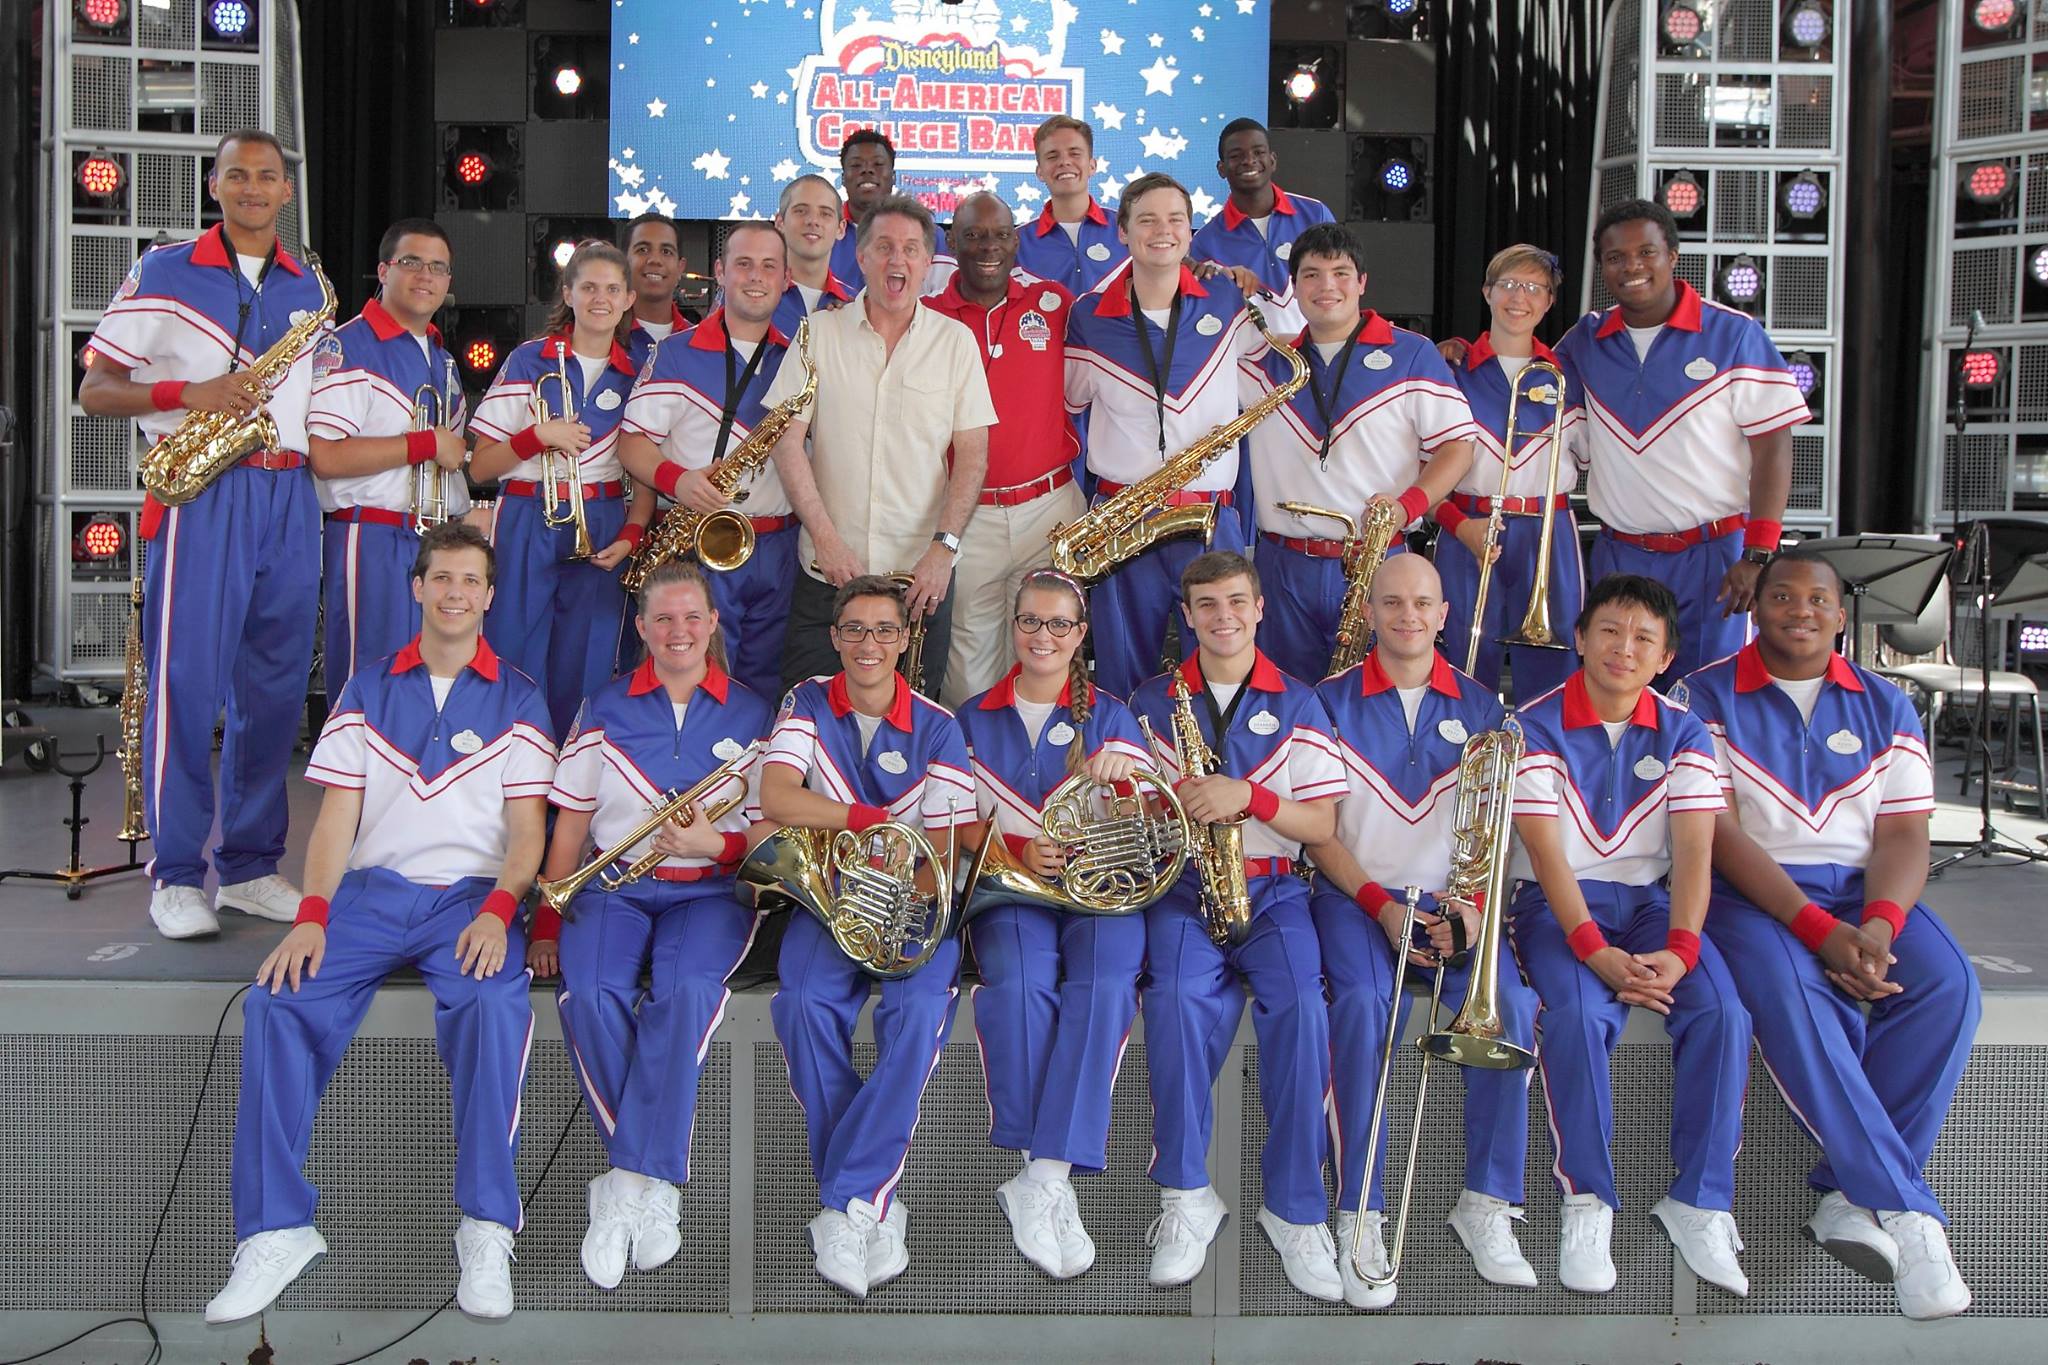 Gordon Goodwin Performs with Disneyland Resort 2016 All-American College Band